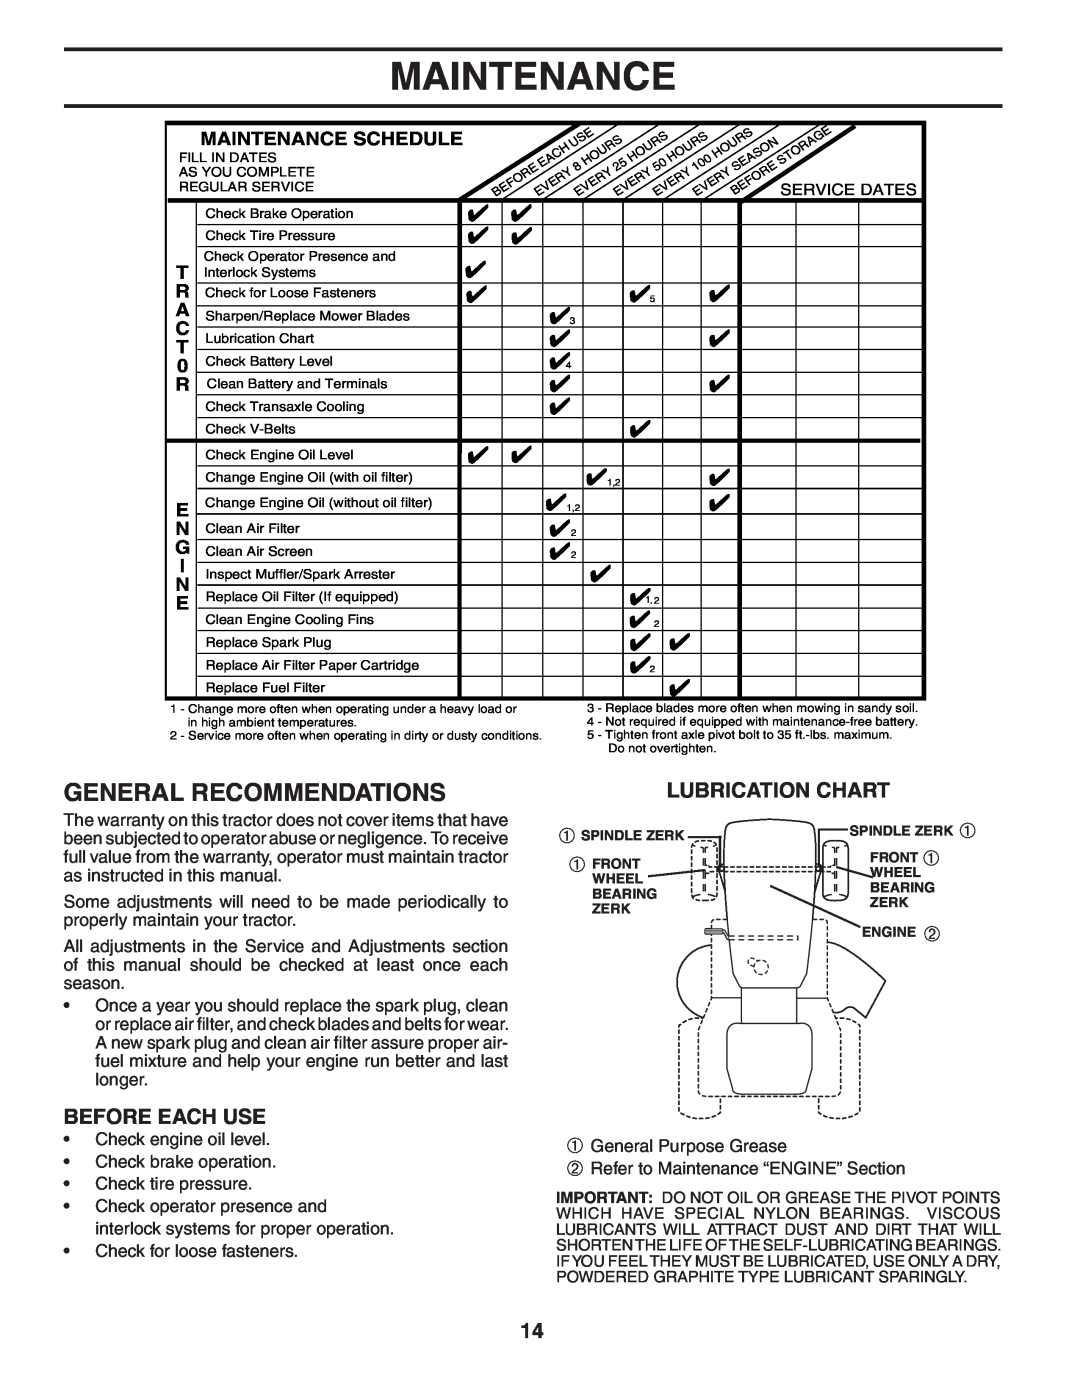 Weed Eater WE165T42A manual General Recommendations, Before Each Use, Lubrication Chart, Maintenance Schedule 